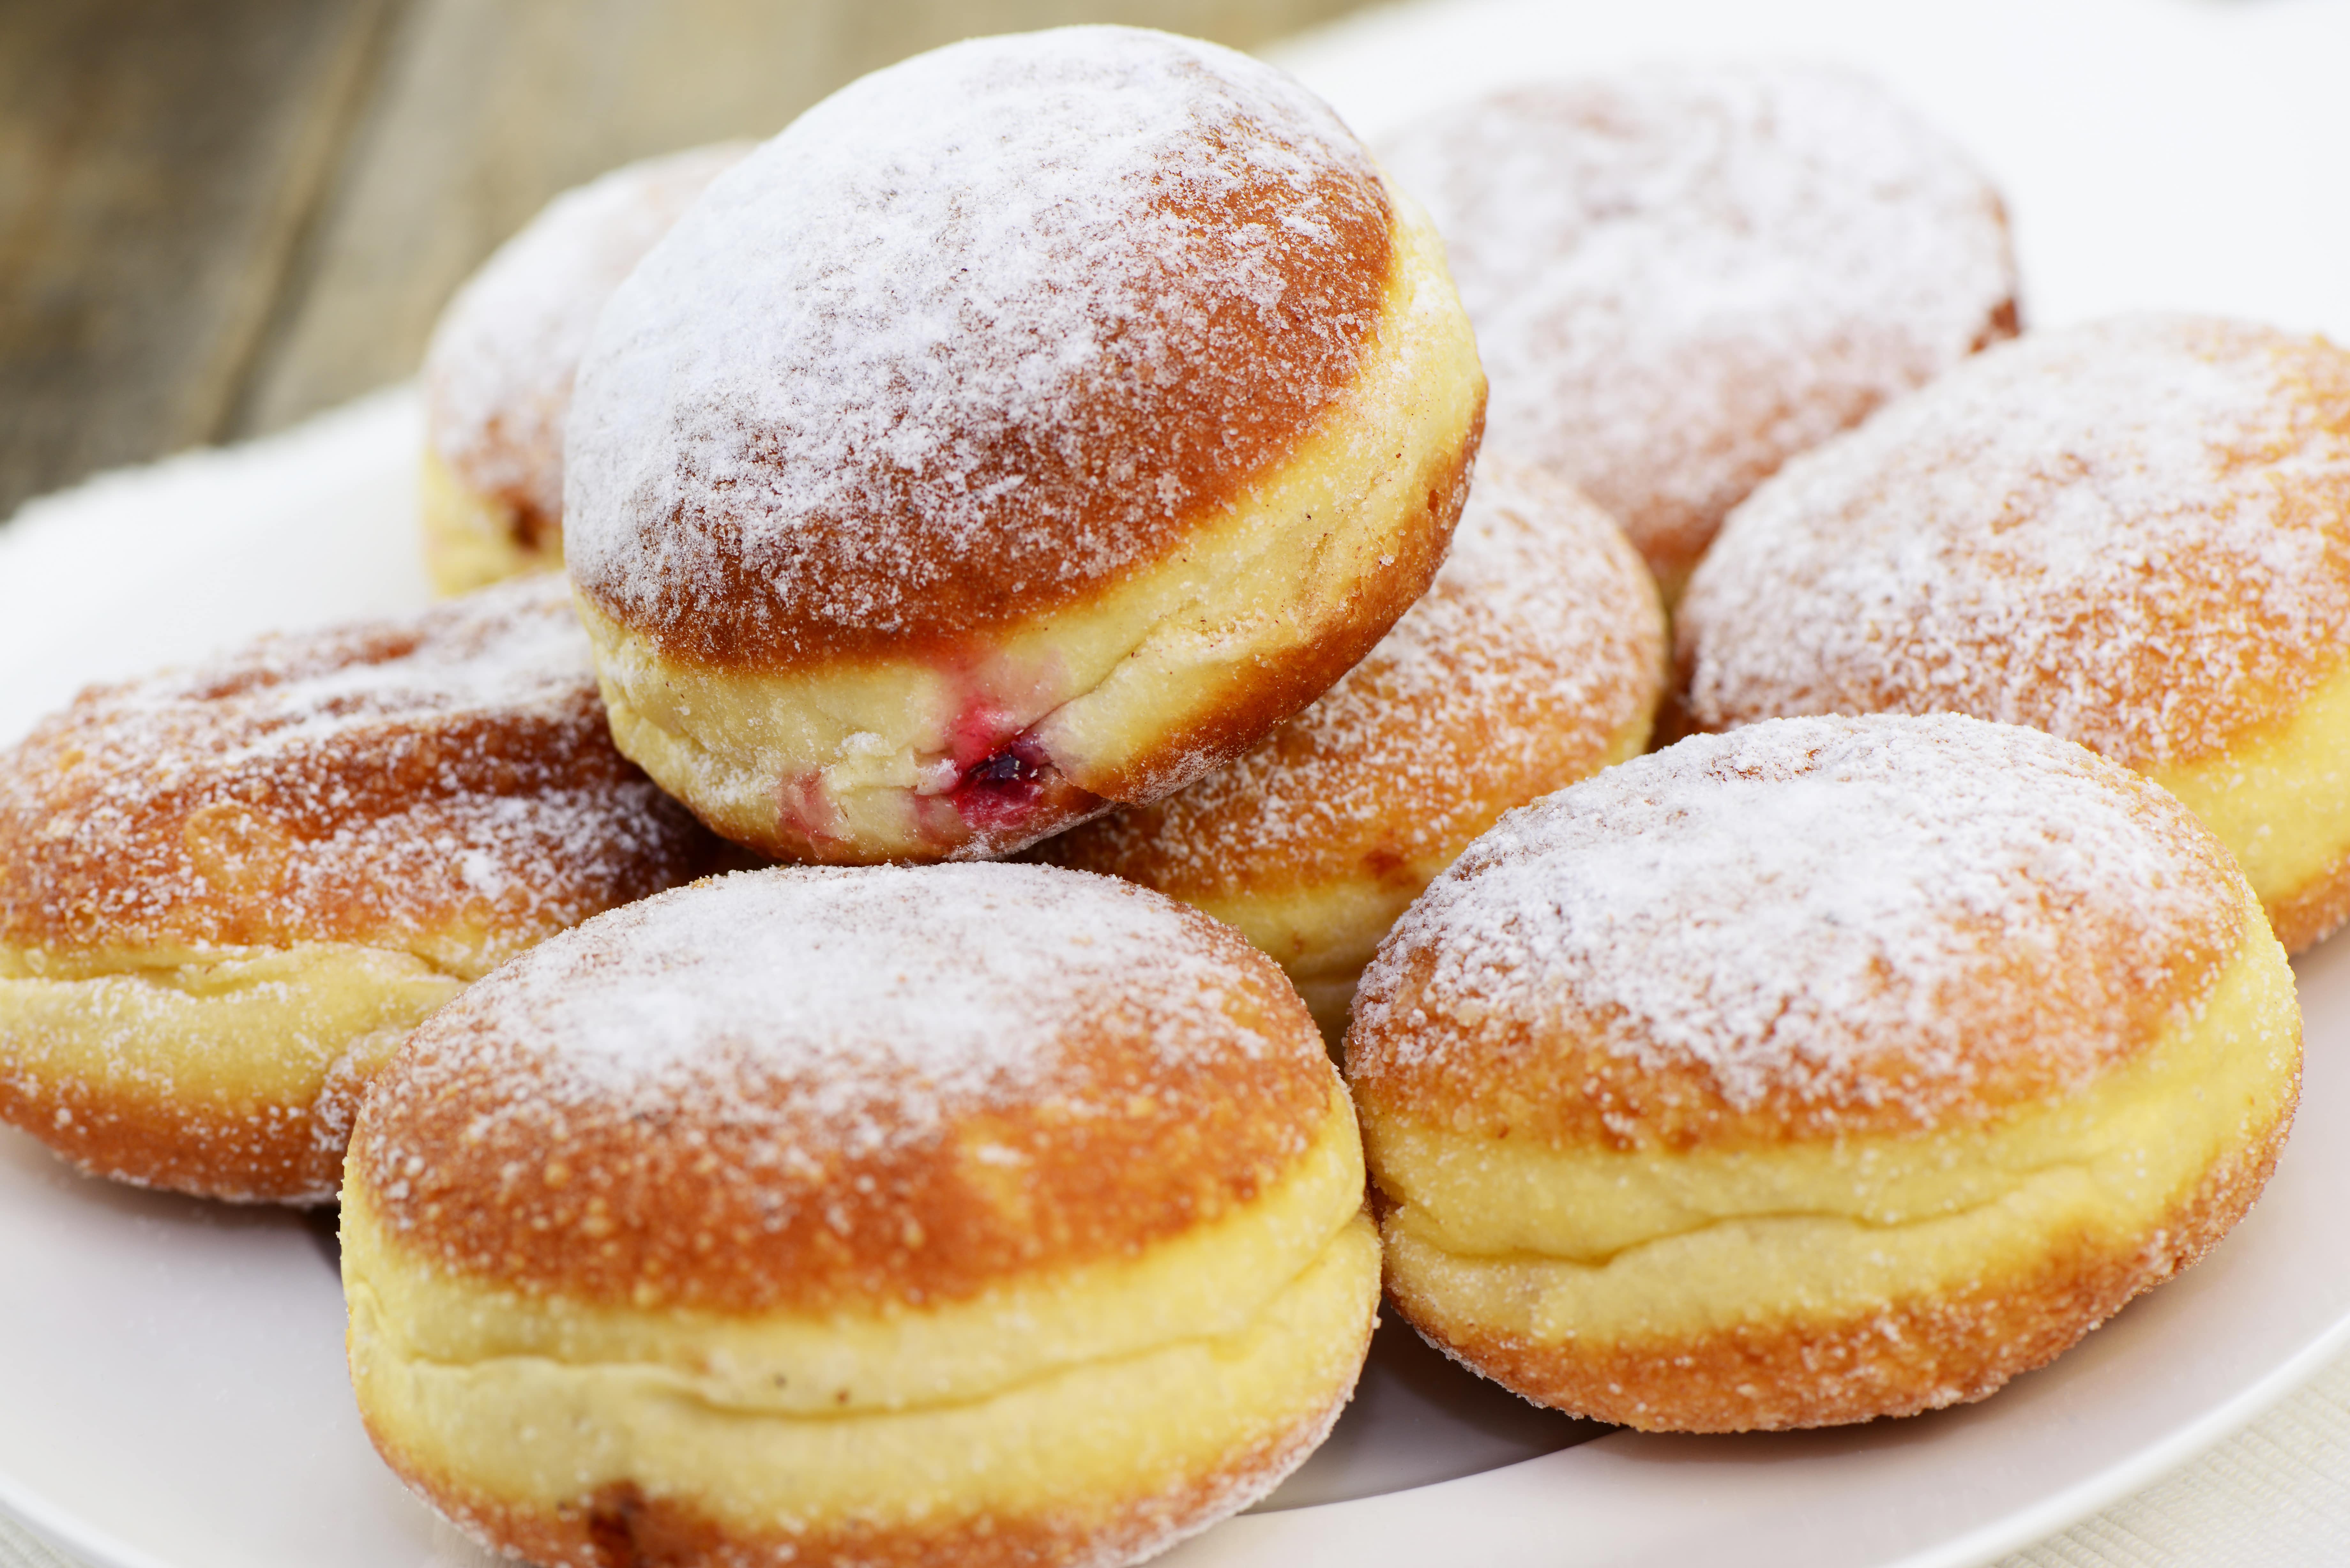 Plate of jam doughnuts dusted with icing sugar.